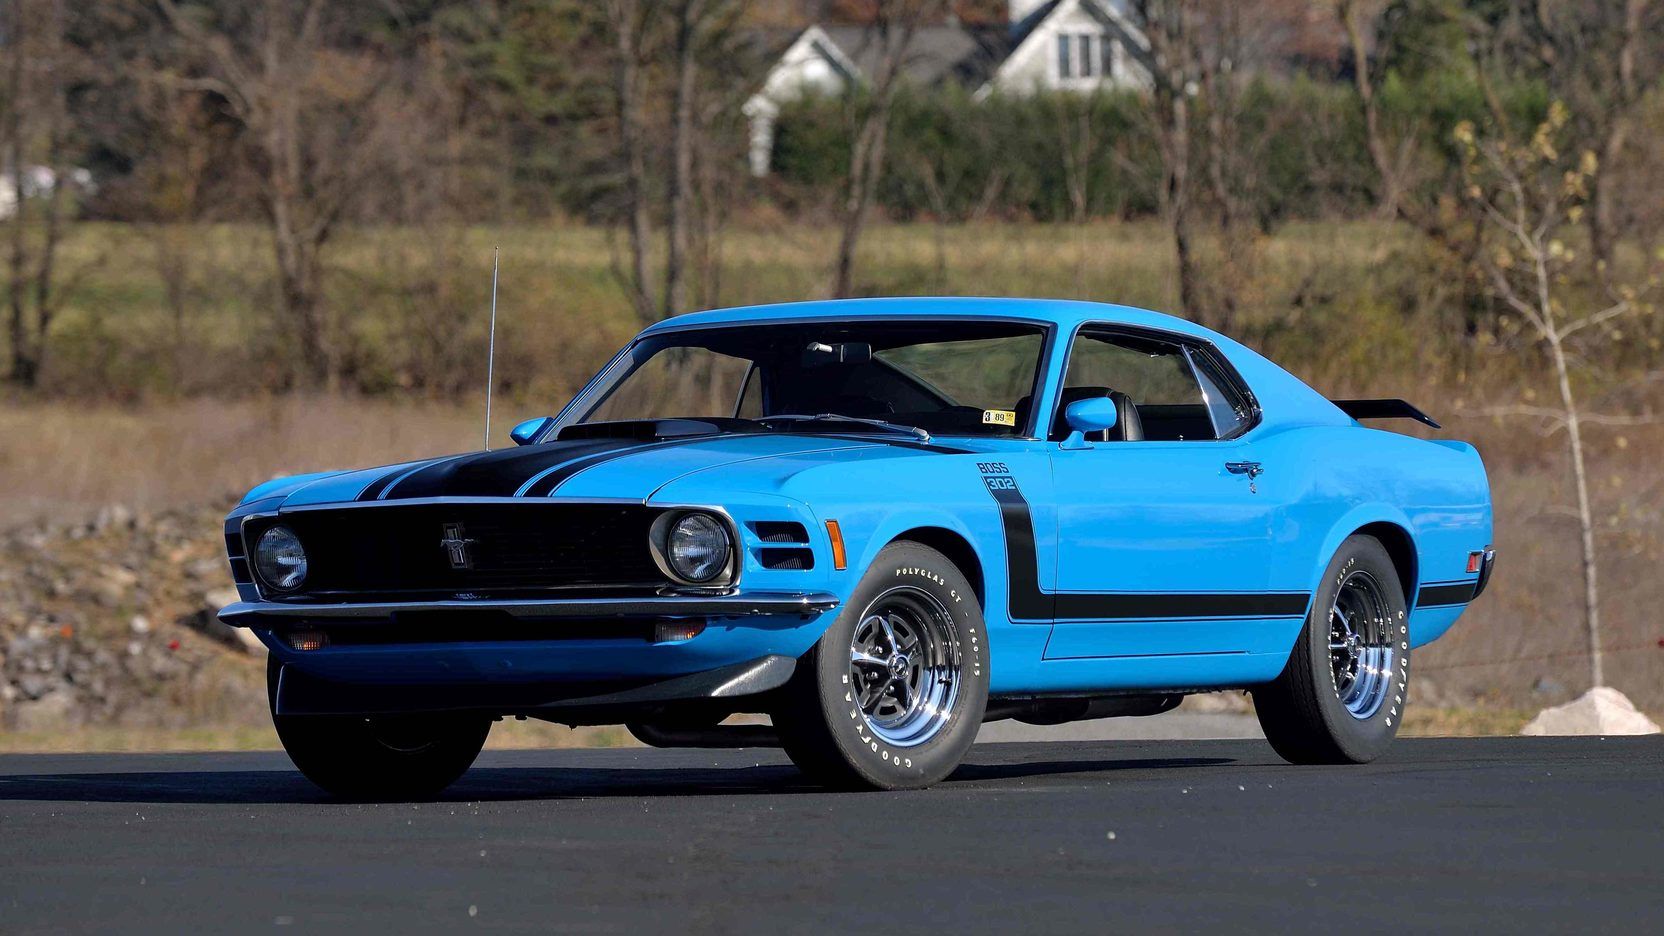 1970 Ford Mustang BOSS 302 Fastback up for auction